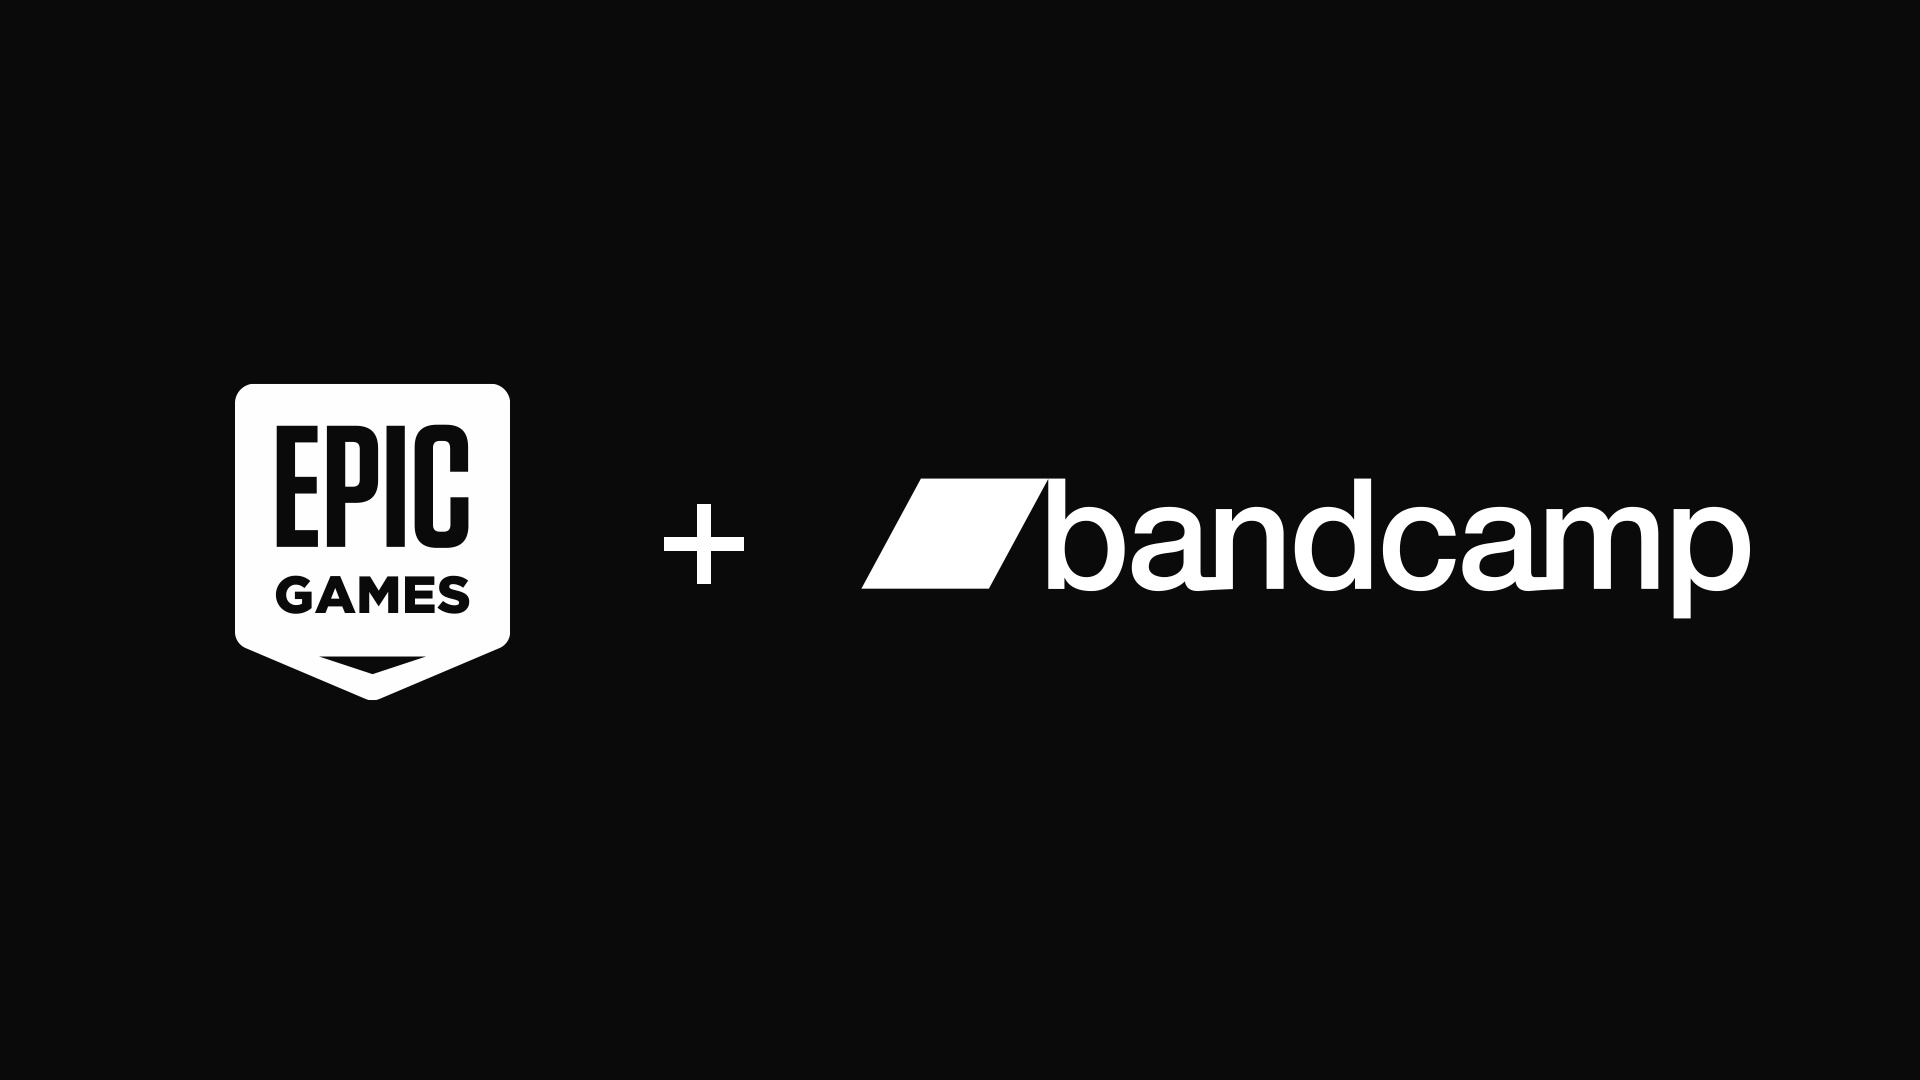 Fortnite developers Epic Games acquire Bandcamp